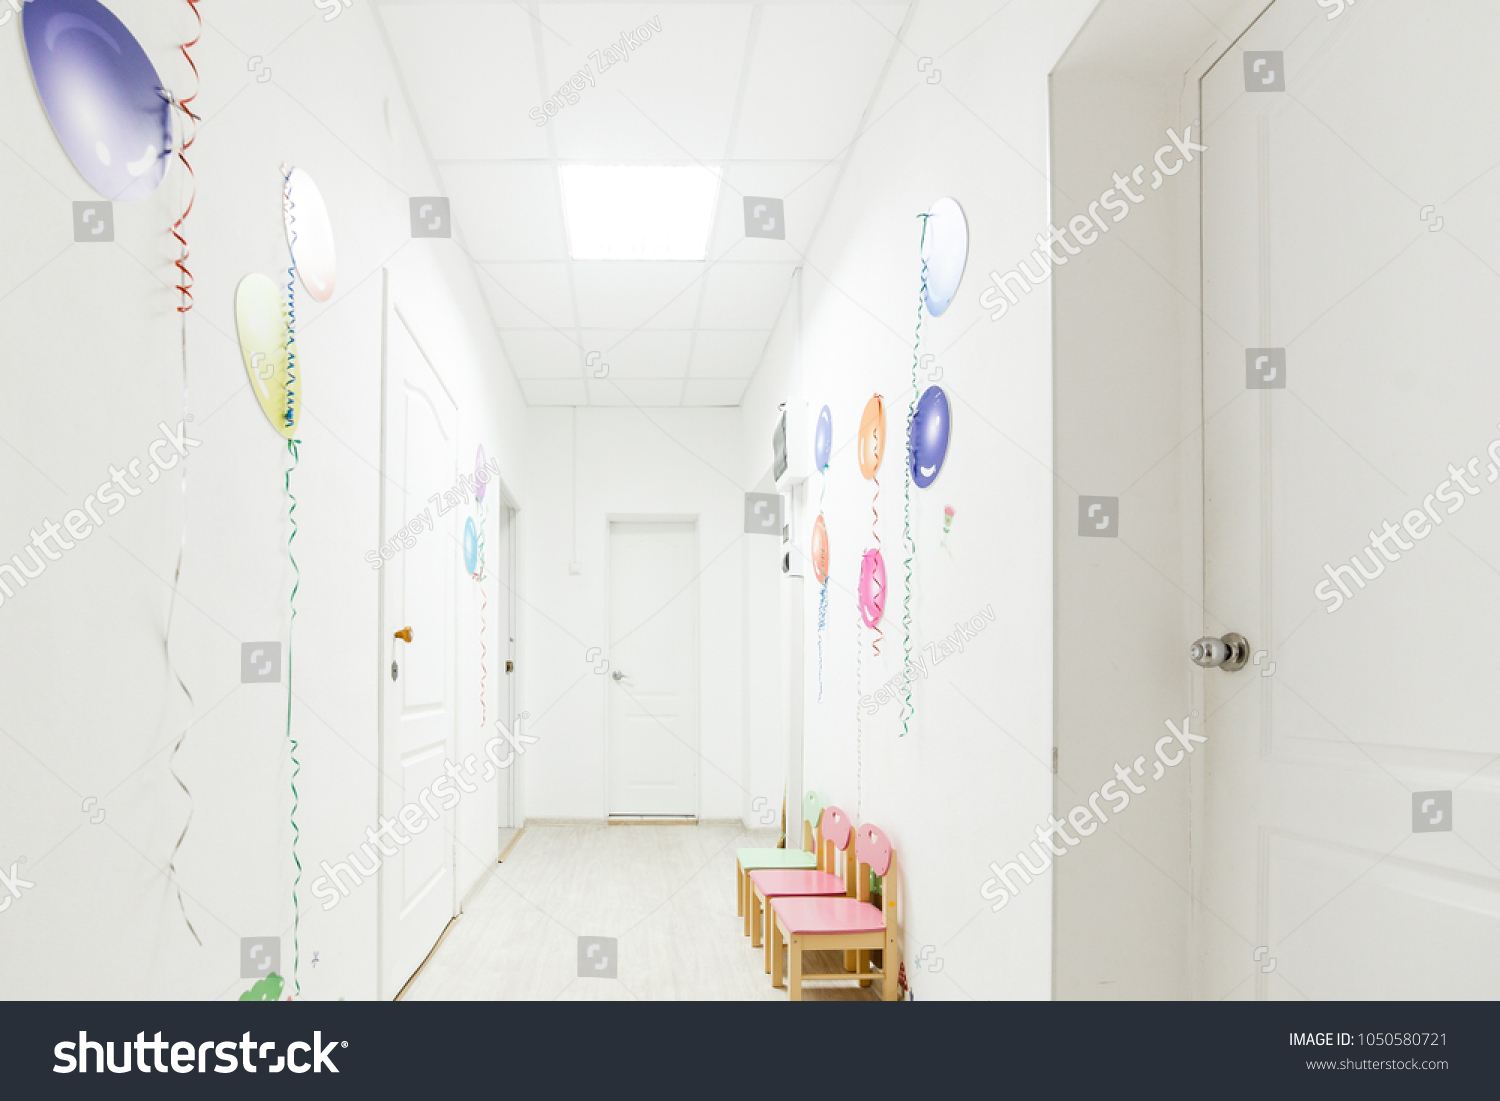 Bright interior of corridor hallway of a nursery school during the holidays without children #1050580721